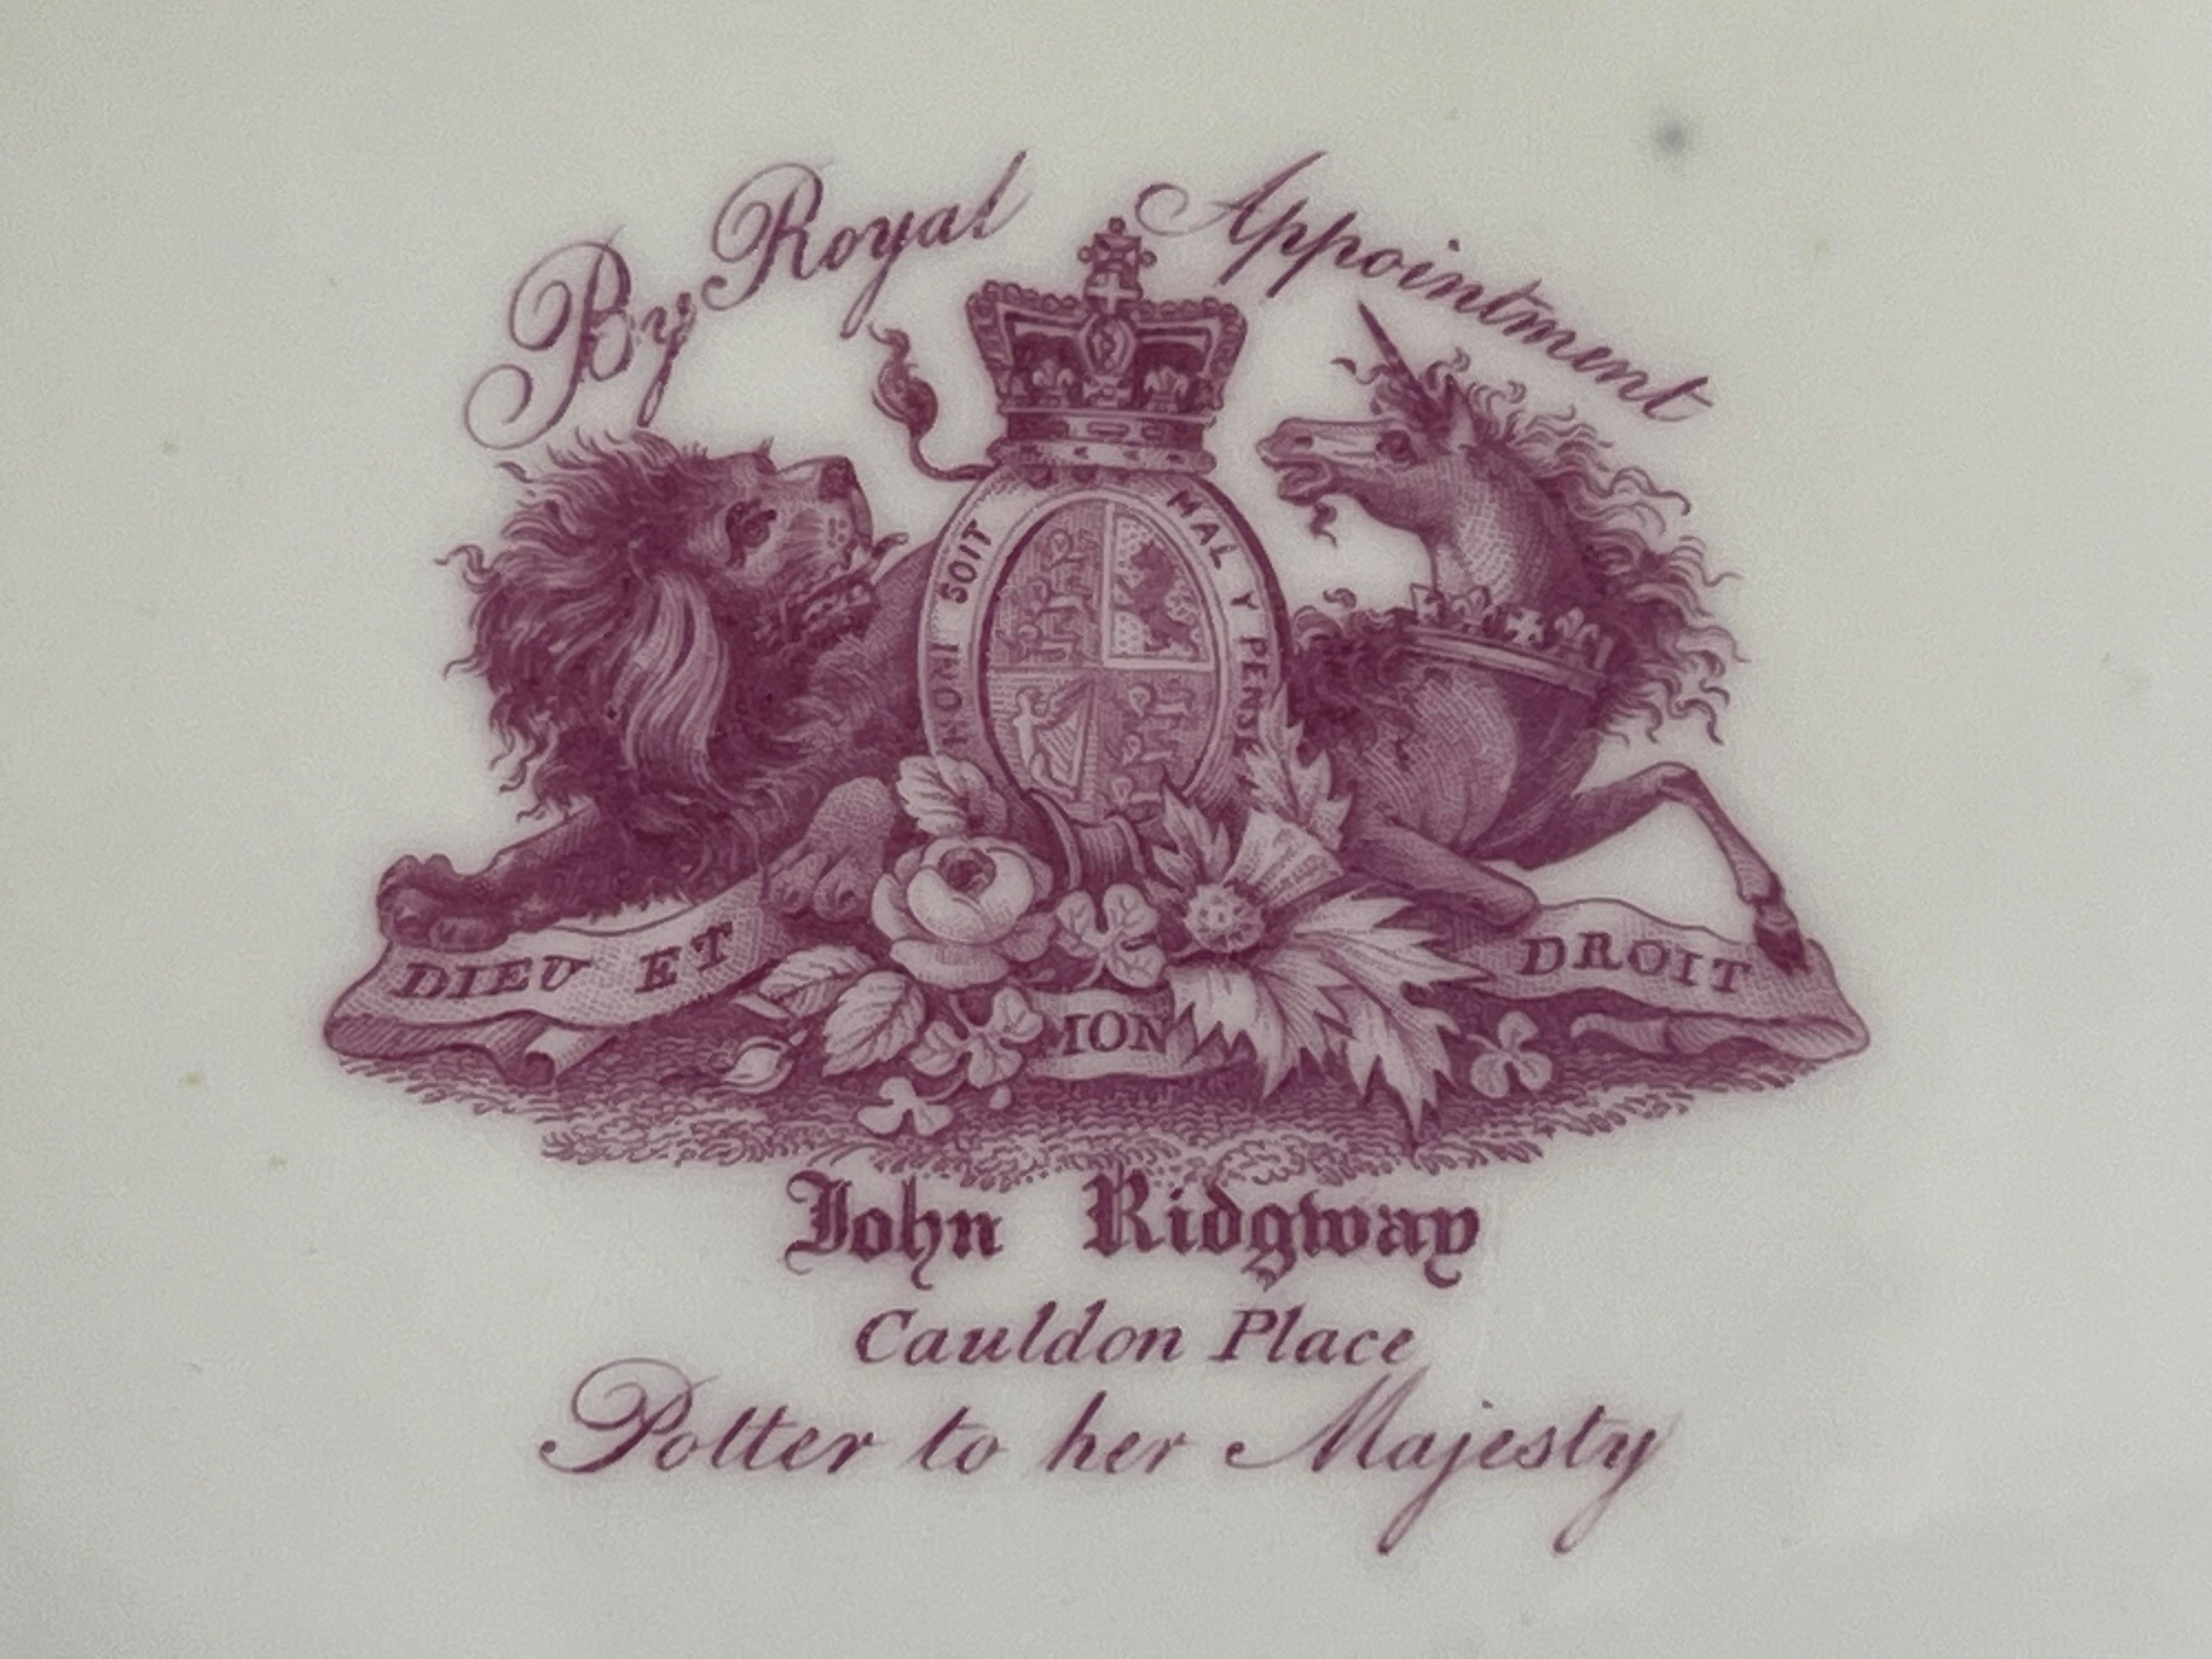 Hand-Painted Rare and Possibly Unique Ridgway Royal Porcelain Plate C.1850 For Sale